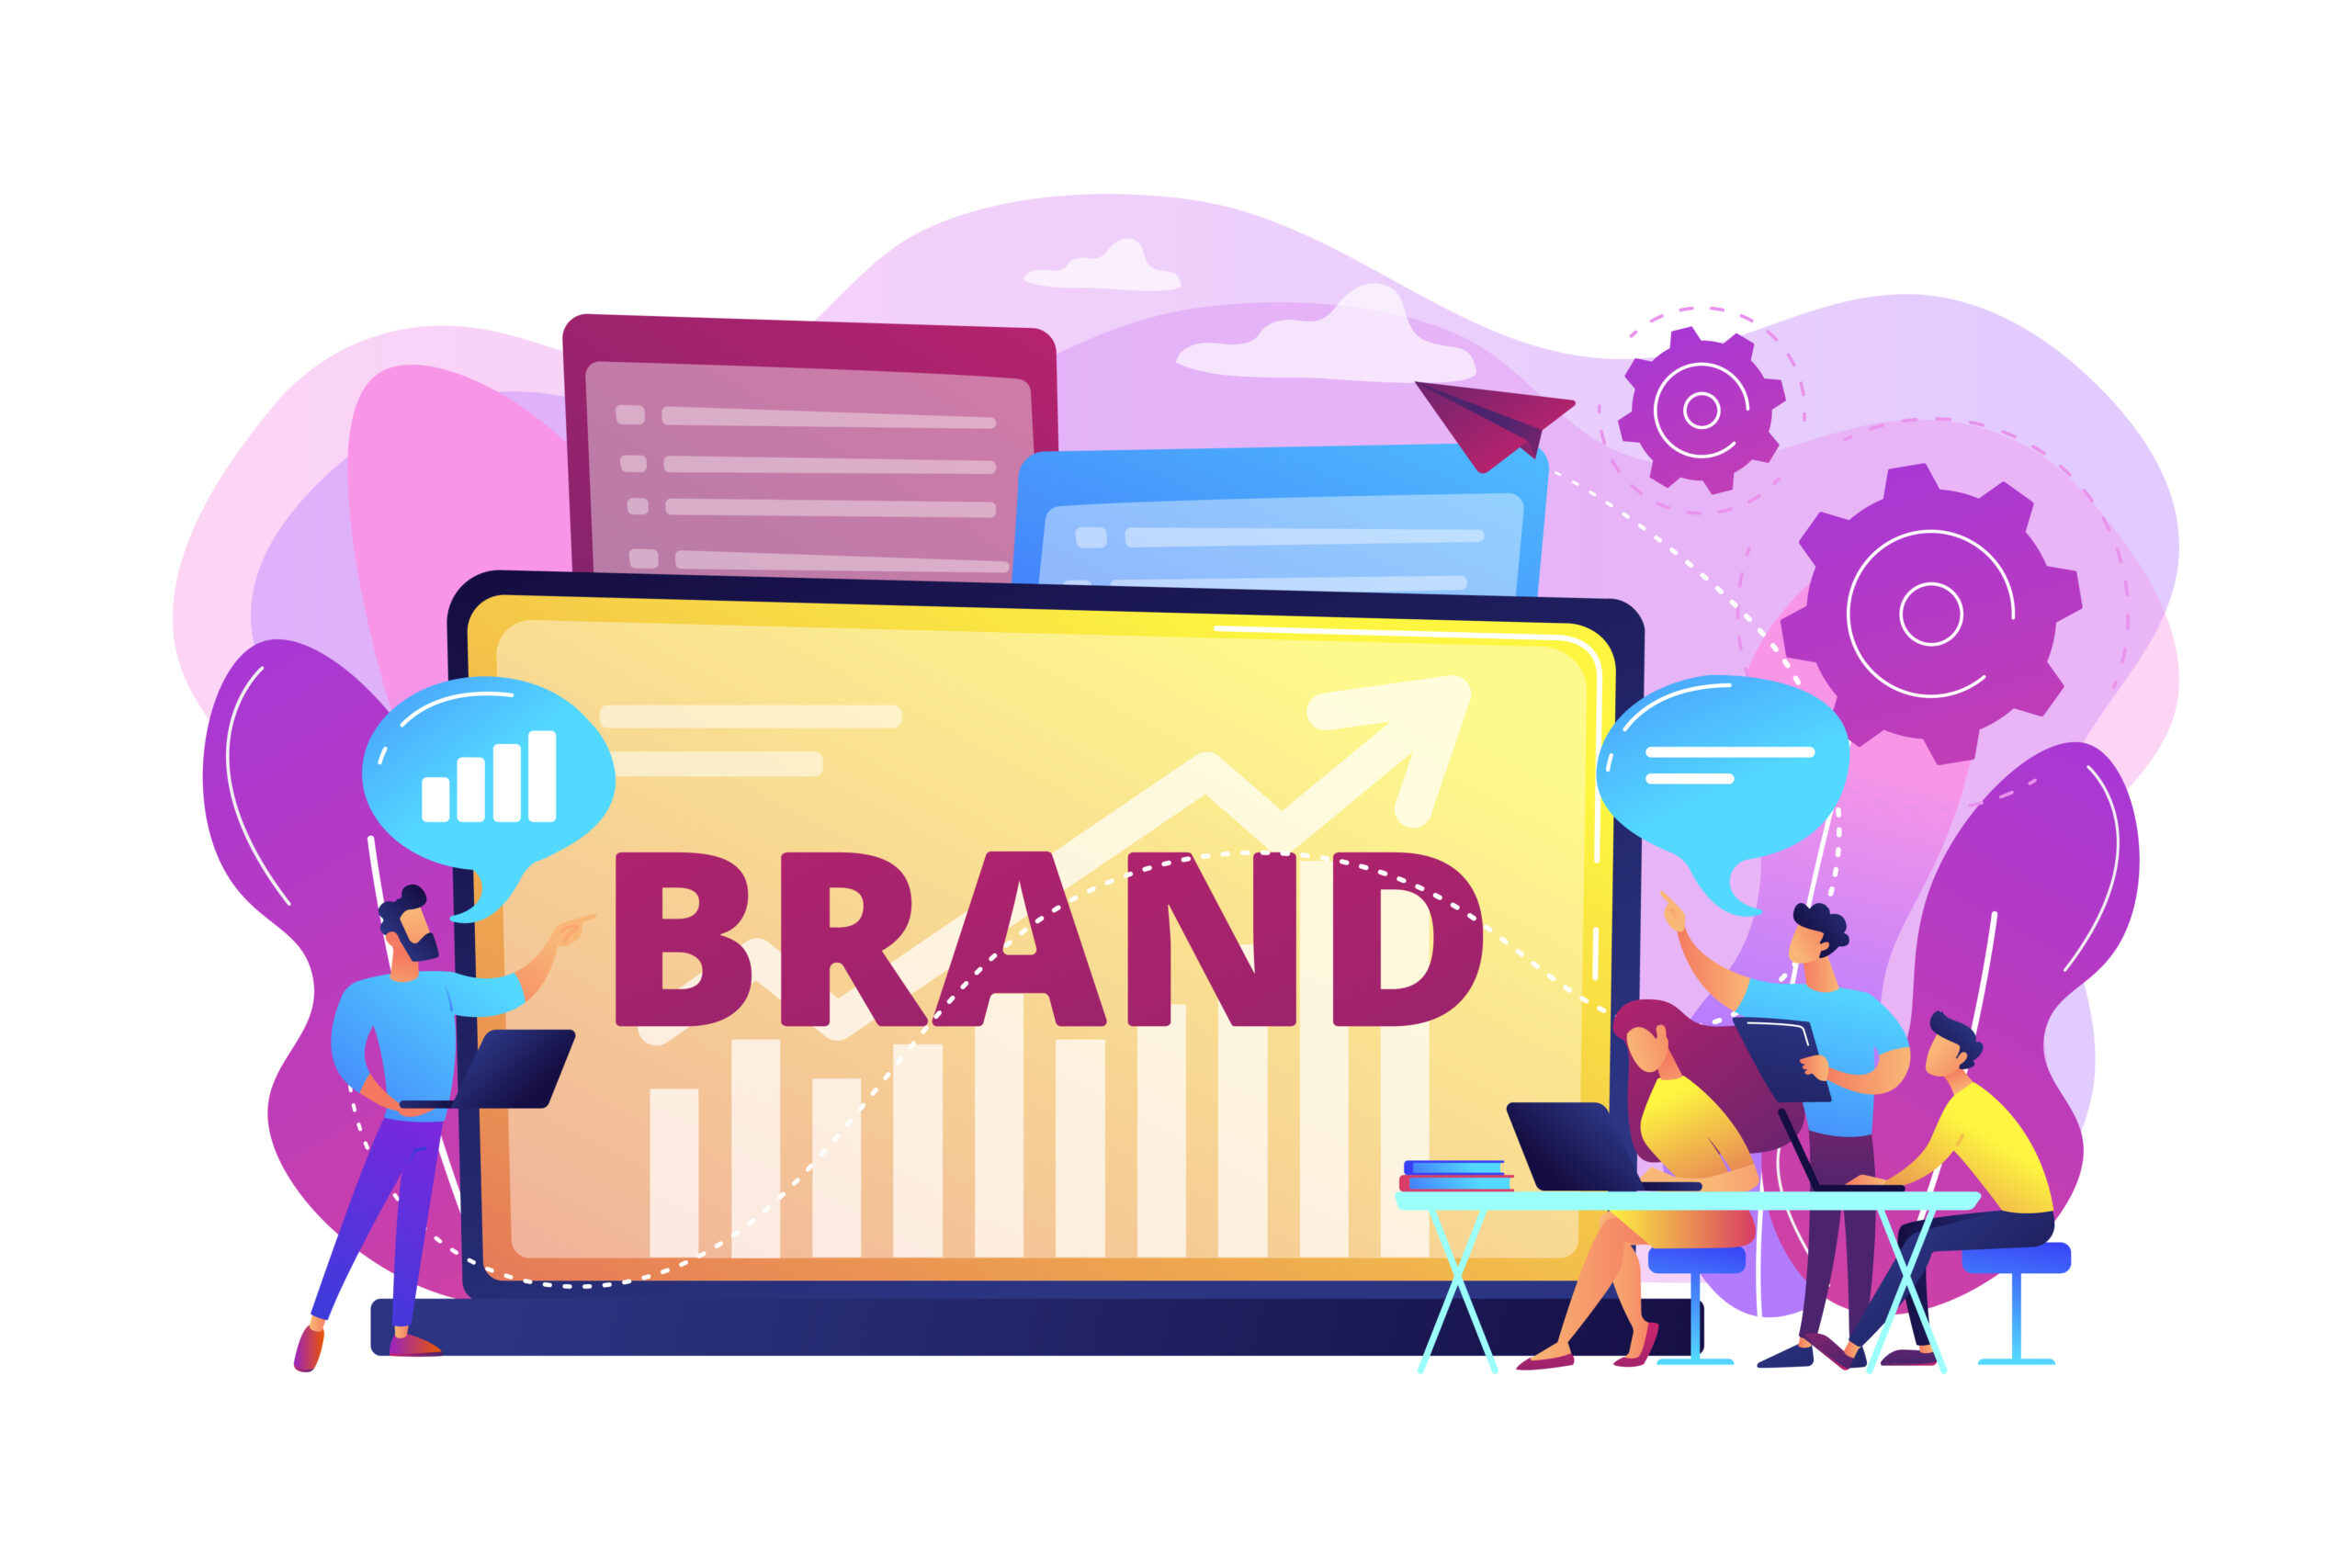 long-term Brand strategy increases Profits